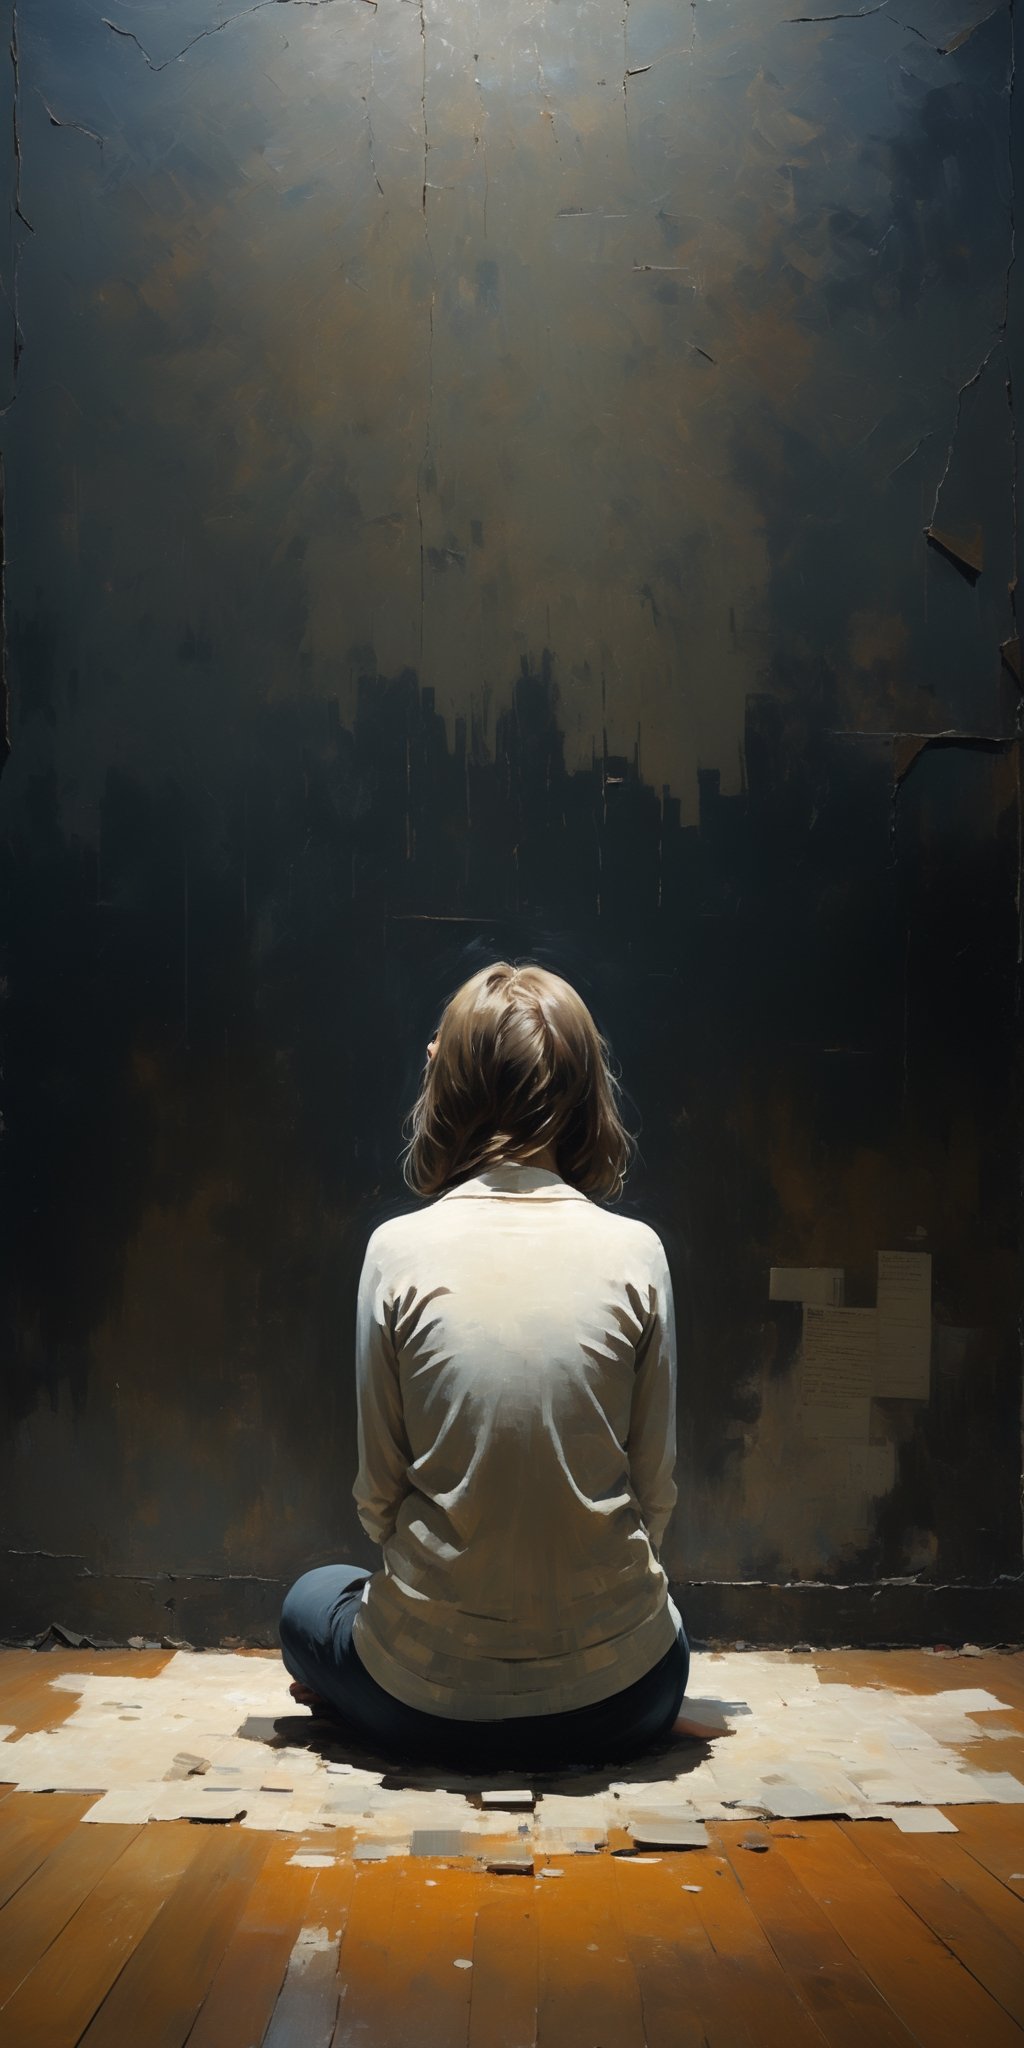 (masterpiece, high quality, 8K, high_res), 
extremely detailed illustration, abstract picture, symbolism, sensual, dark, dramatic, sad, psyholigic,
an empty room with black walls, text written on the walls in white letters, a girl sits in the center of the room, her pose expresses despair and depression,
The room itself symbolizes the place in her mind where she hid all her regrets, fears, doubts, which are expressed in the form of text on the walls, and her being in this room signifies her attempts to cope with mental problems. The desperation pose suggests that she can't handle it. The film raises the theme of loneliness and the inability to cope with depression personally, that everyone needs help and courage to share their problems with others.